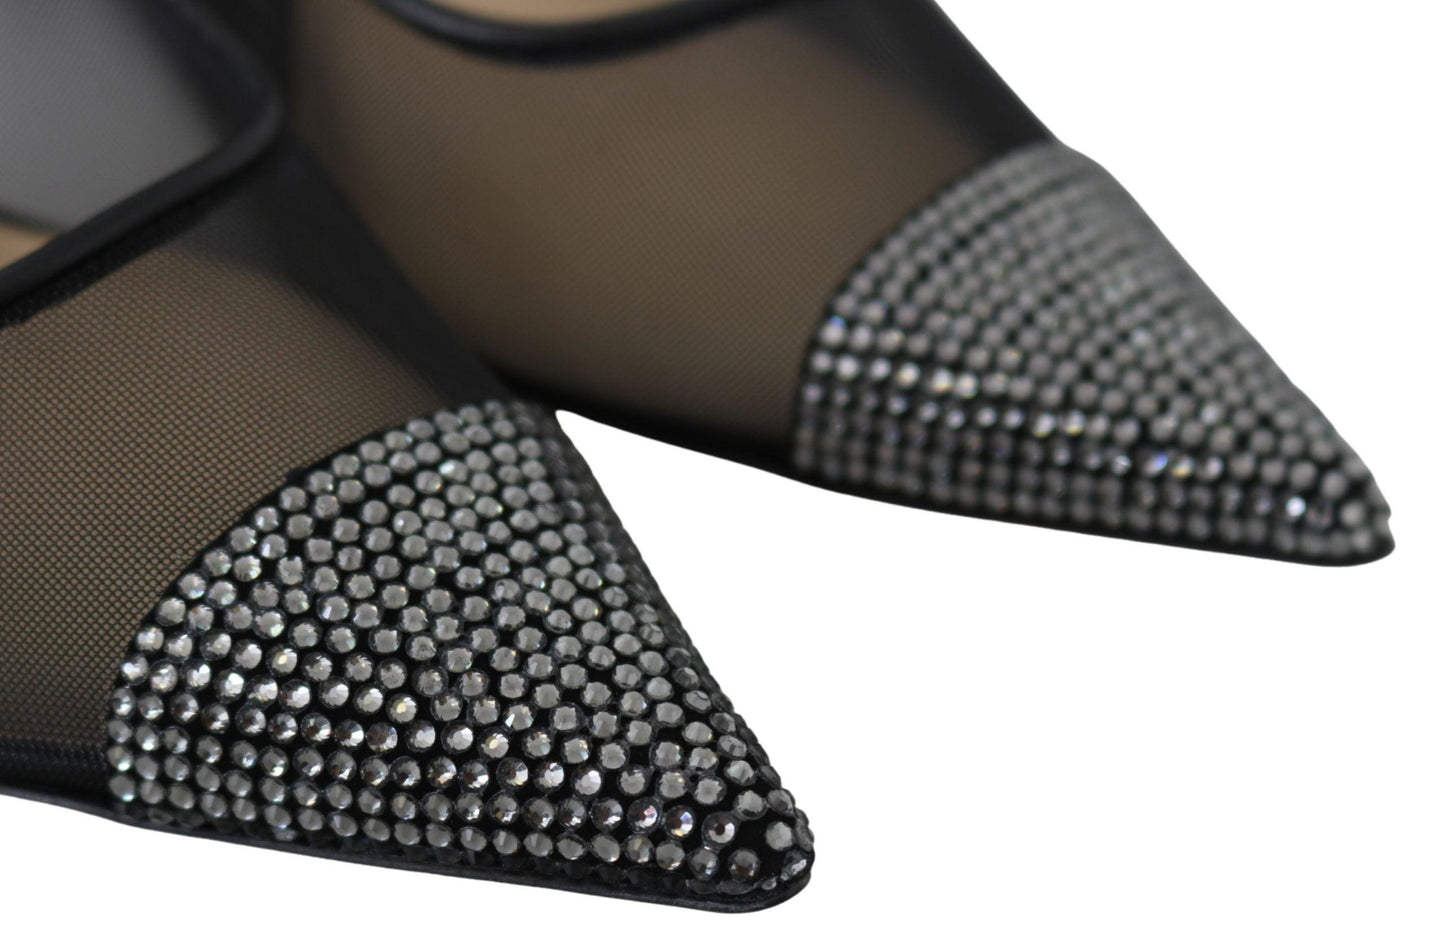 Jimmy Choo Black Mesh Amika 85 Diamond Pumps Shoes - Designed by Jimmy Choo Available to Buy at a Discounted Price on Moon Behind The Hill Online Designer Discount Store